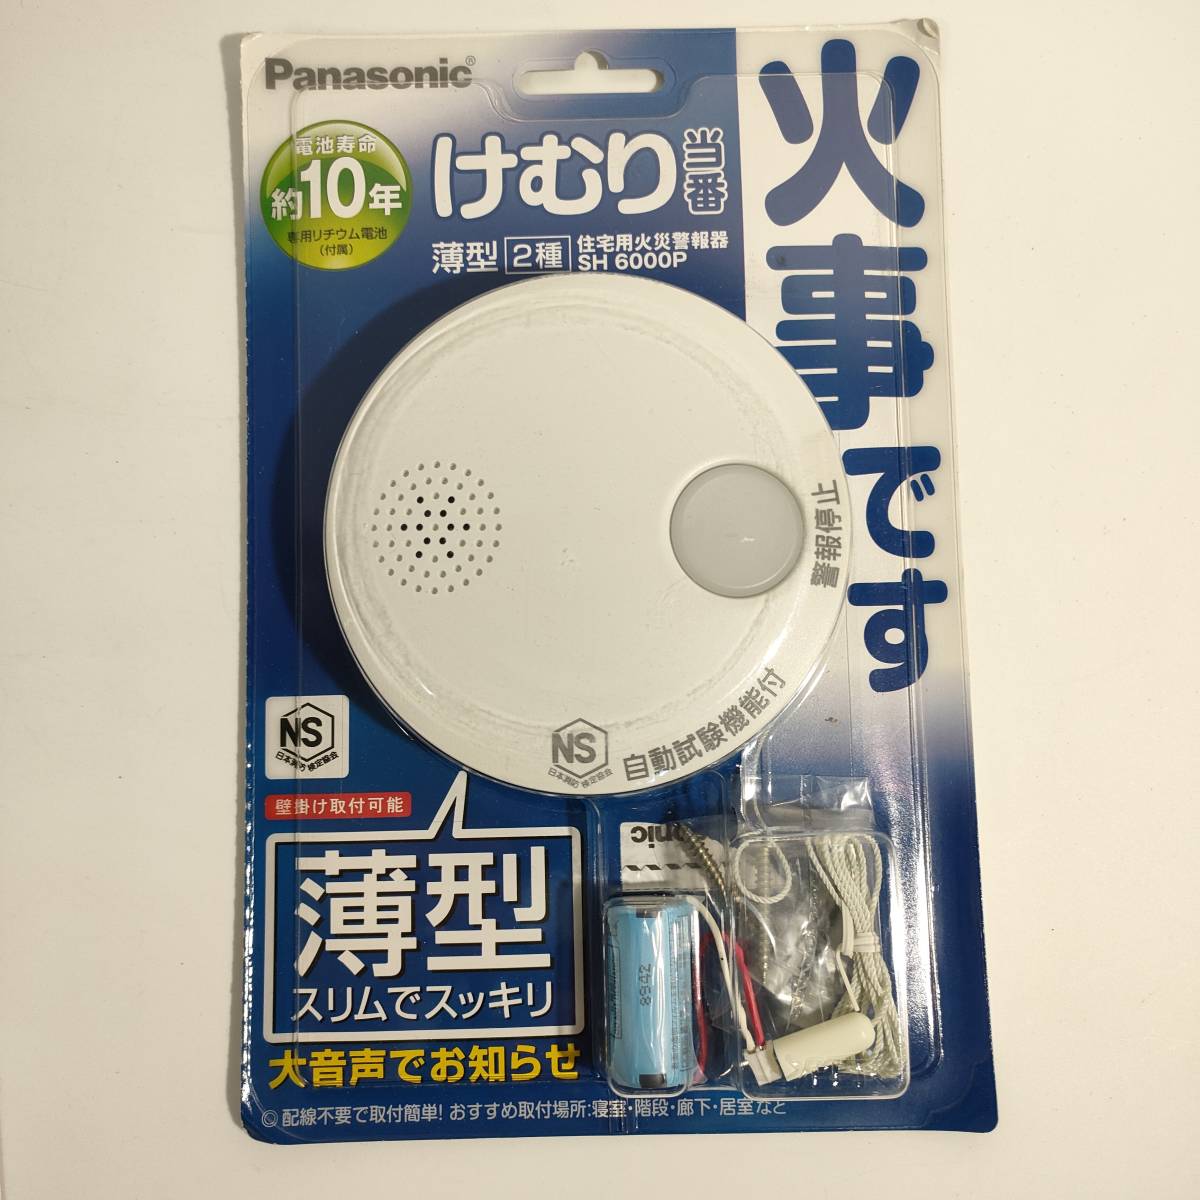 M127 unused 2 piece set Panasonic... present number fire .. Panasonic 2 kind housing for fire alarm vessel SH 6000P/SH 4500P battery type ornament wiring un- for battery 